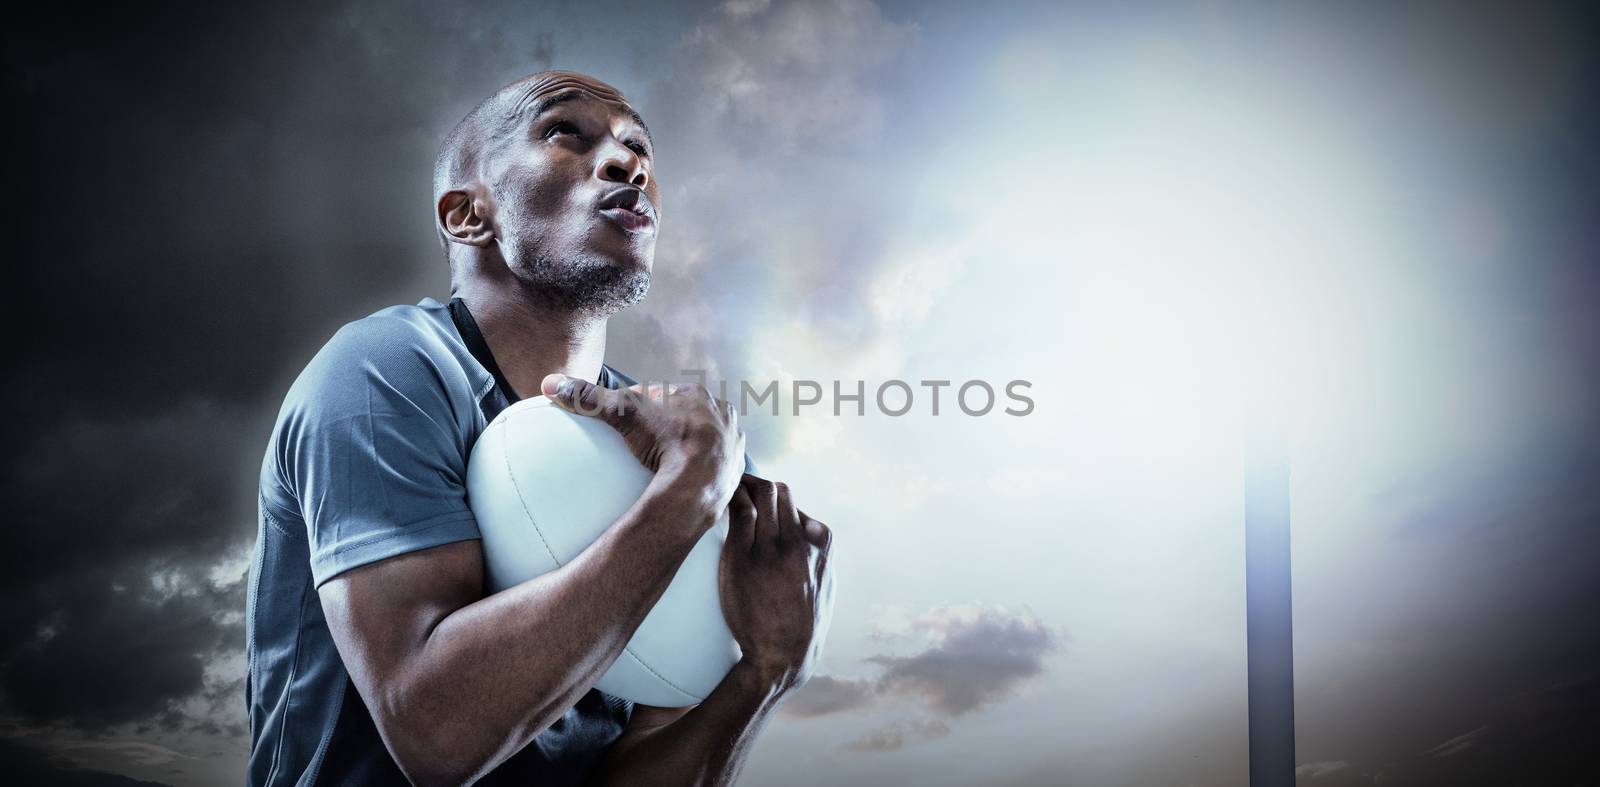 Composite image of rugby player catching ball while playing by Wavebreakmedia